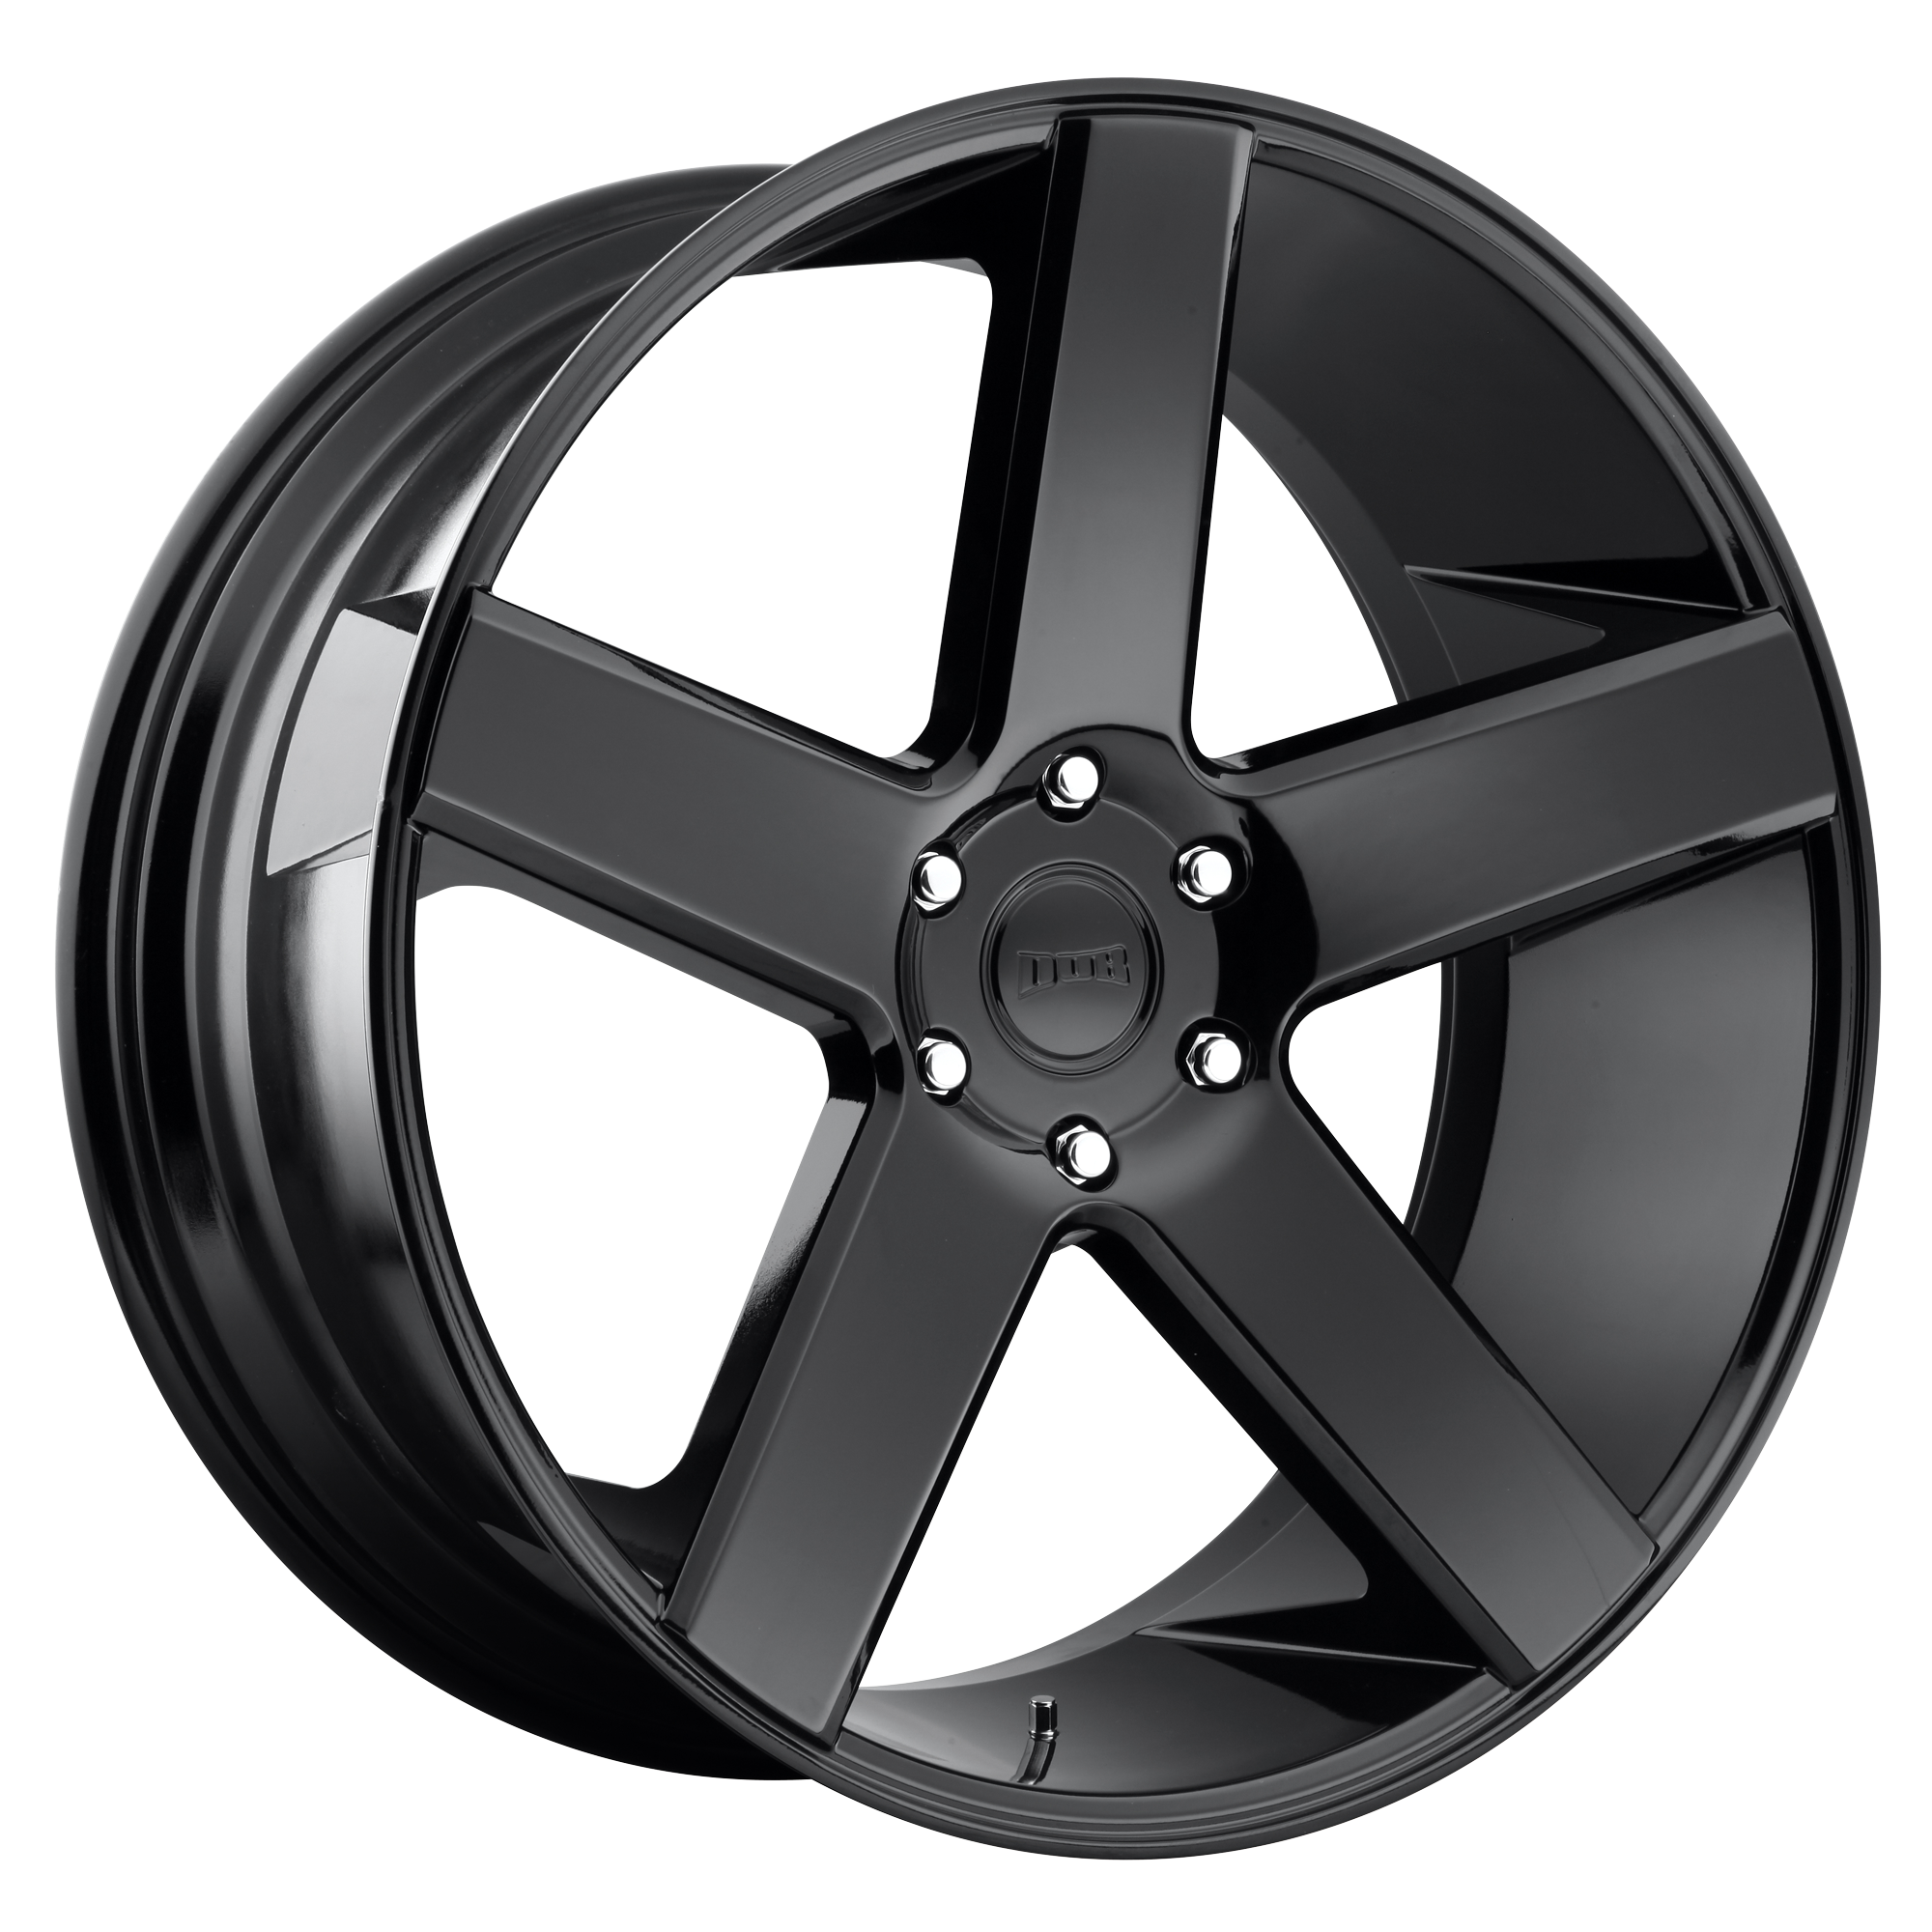 BALLER 24x10 6x139.70 GLOSS BLACK (19 mm) - Tires and Engine Performance